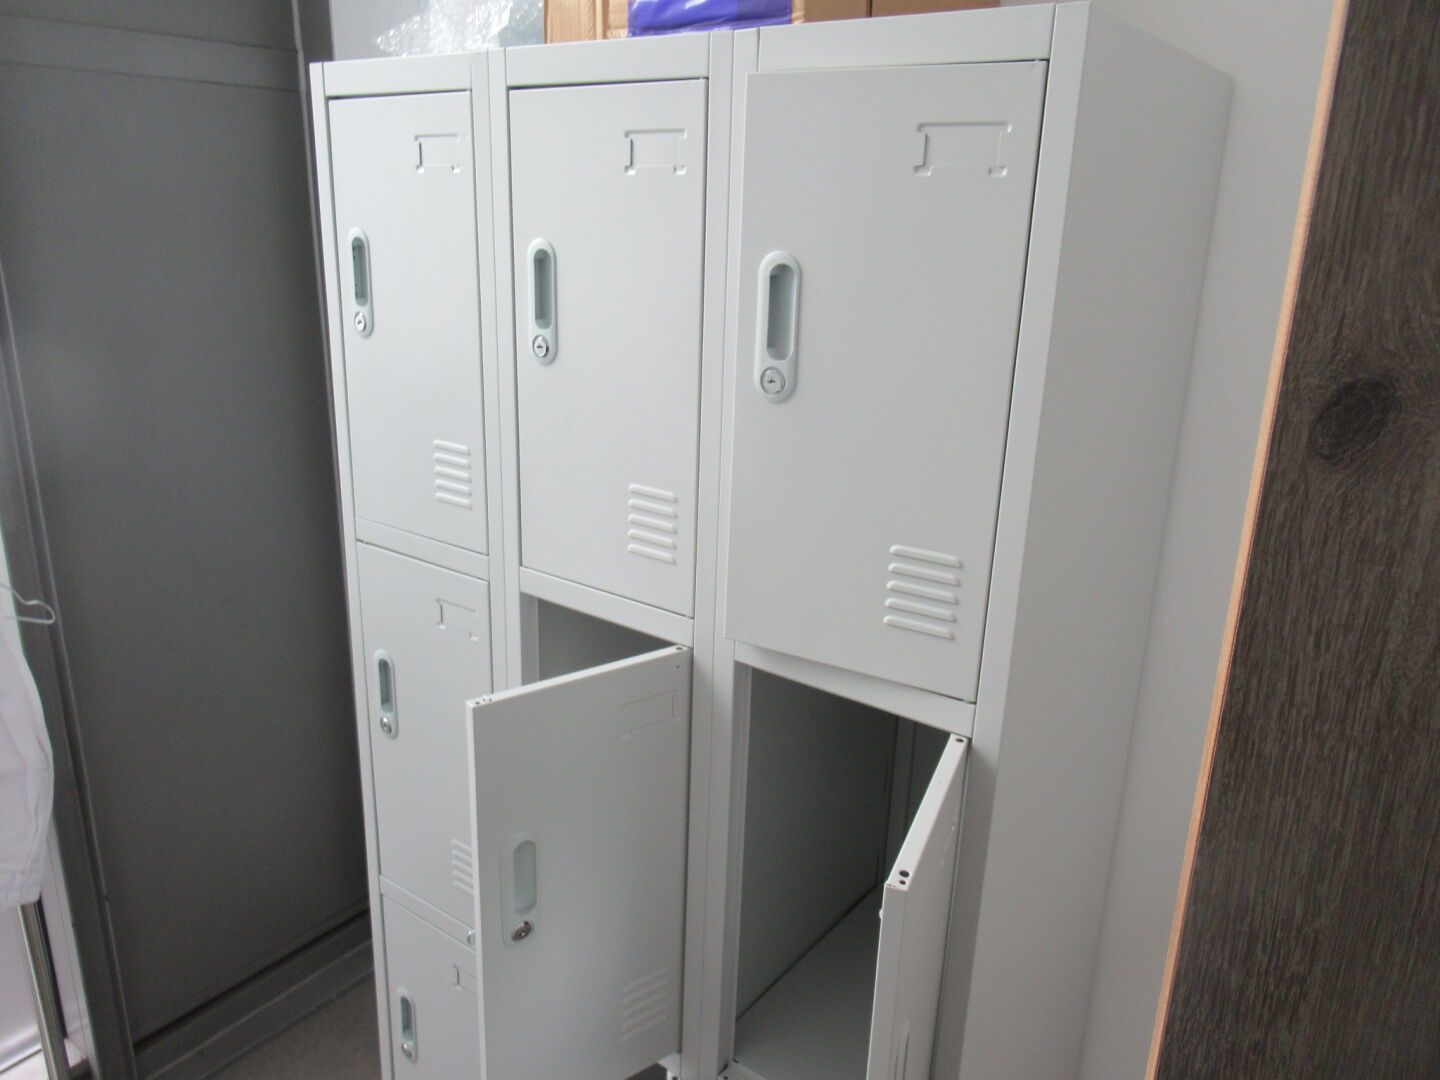 Null 1 locker with 9 compartments